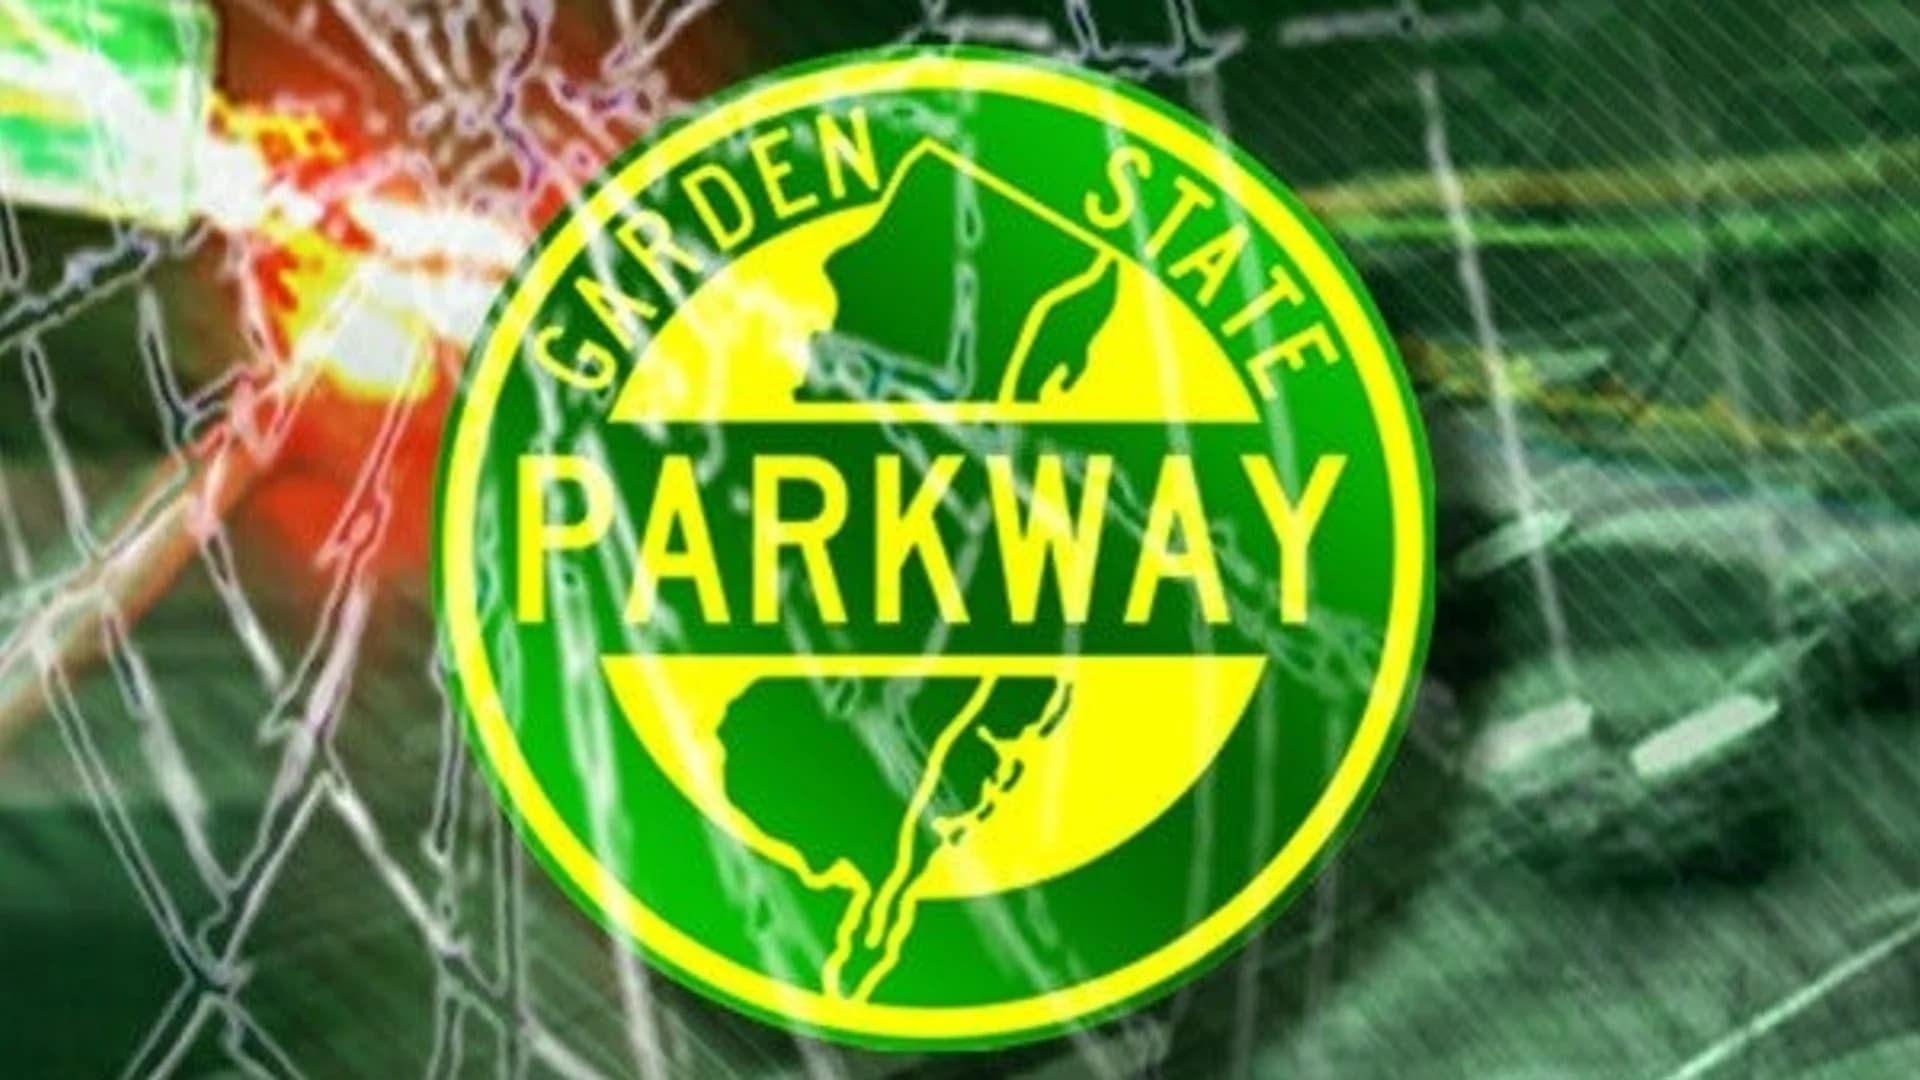 State police: 1 killed on parkway after walking in the travel lanes